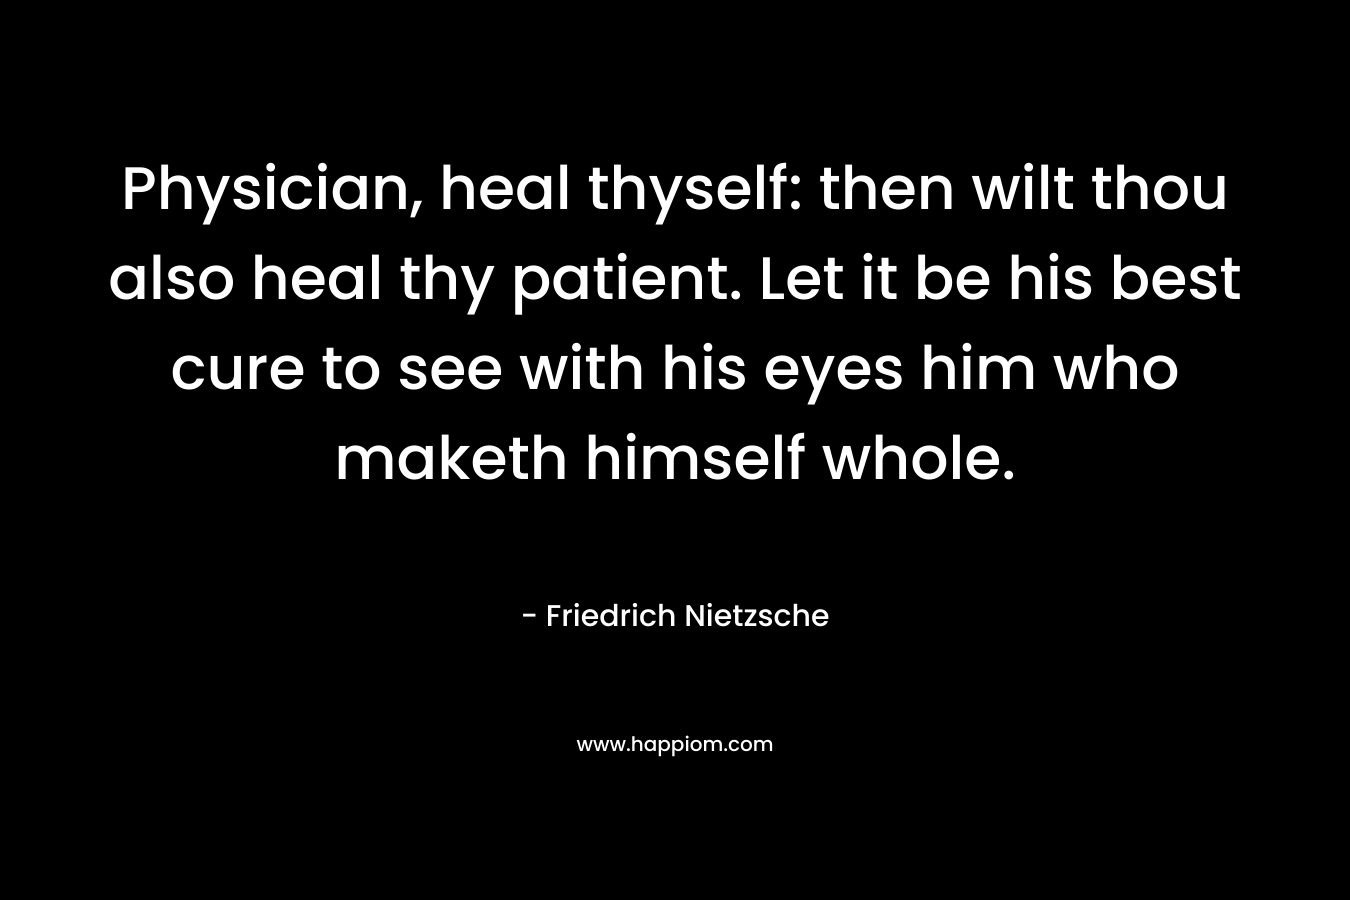 Physician, heal thyself: then wilt thou also heal thy patient. Let it be his best cure to see with his eyes him who maketh himself whole.